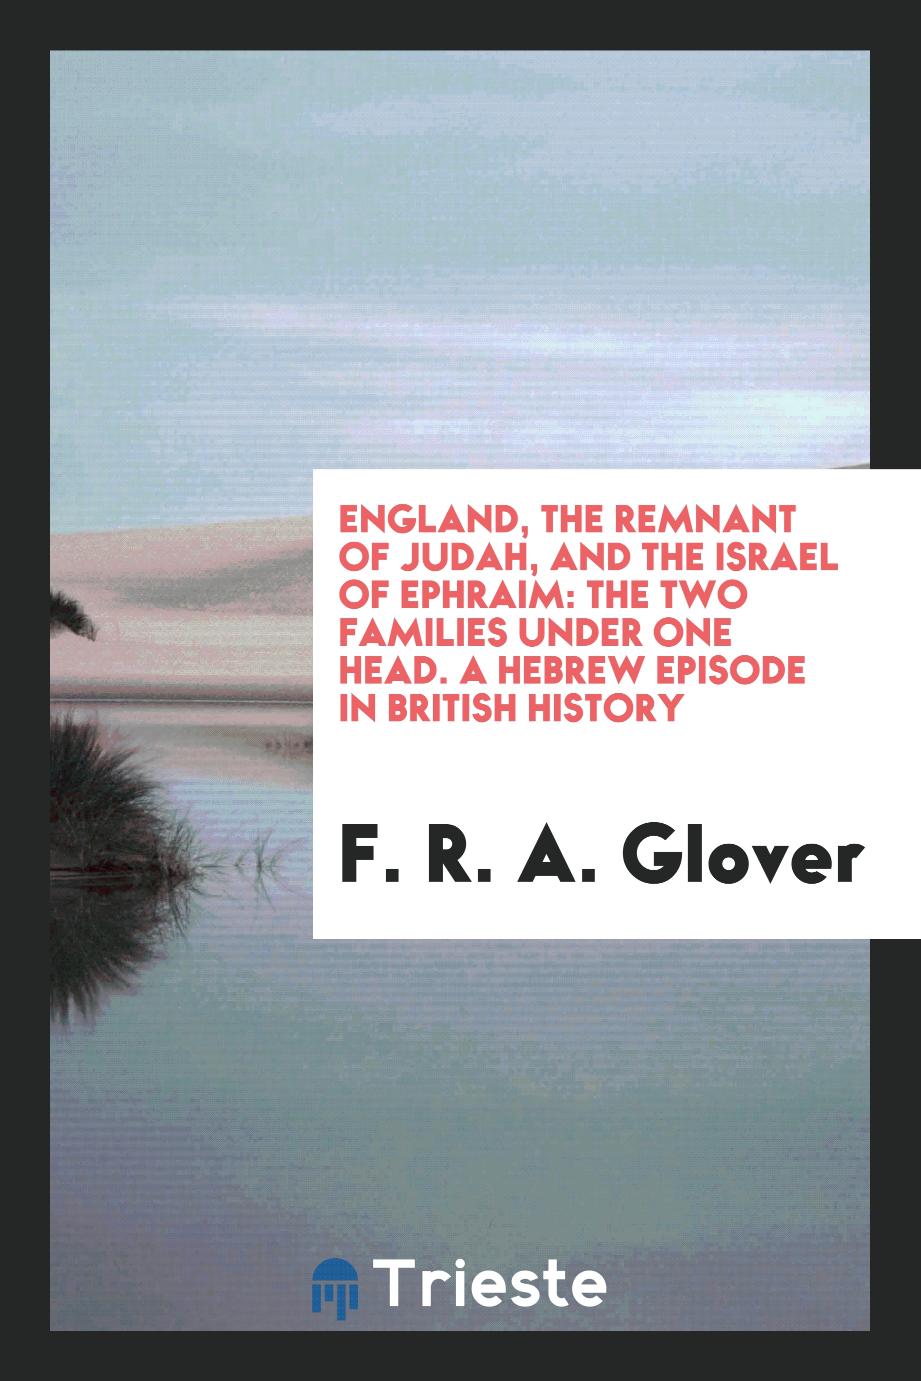 England, the Remnant of Judah, and the Israel of Ephraim: The Two Families Under One Head. A Hebrew Episode in British History